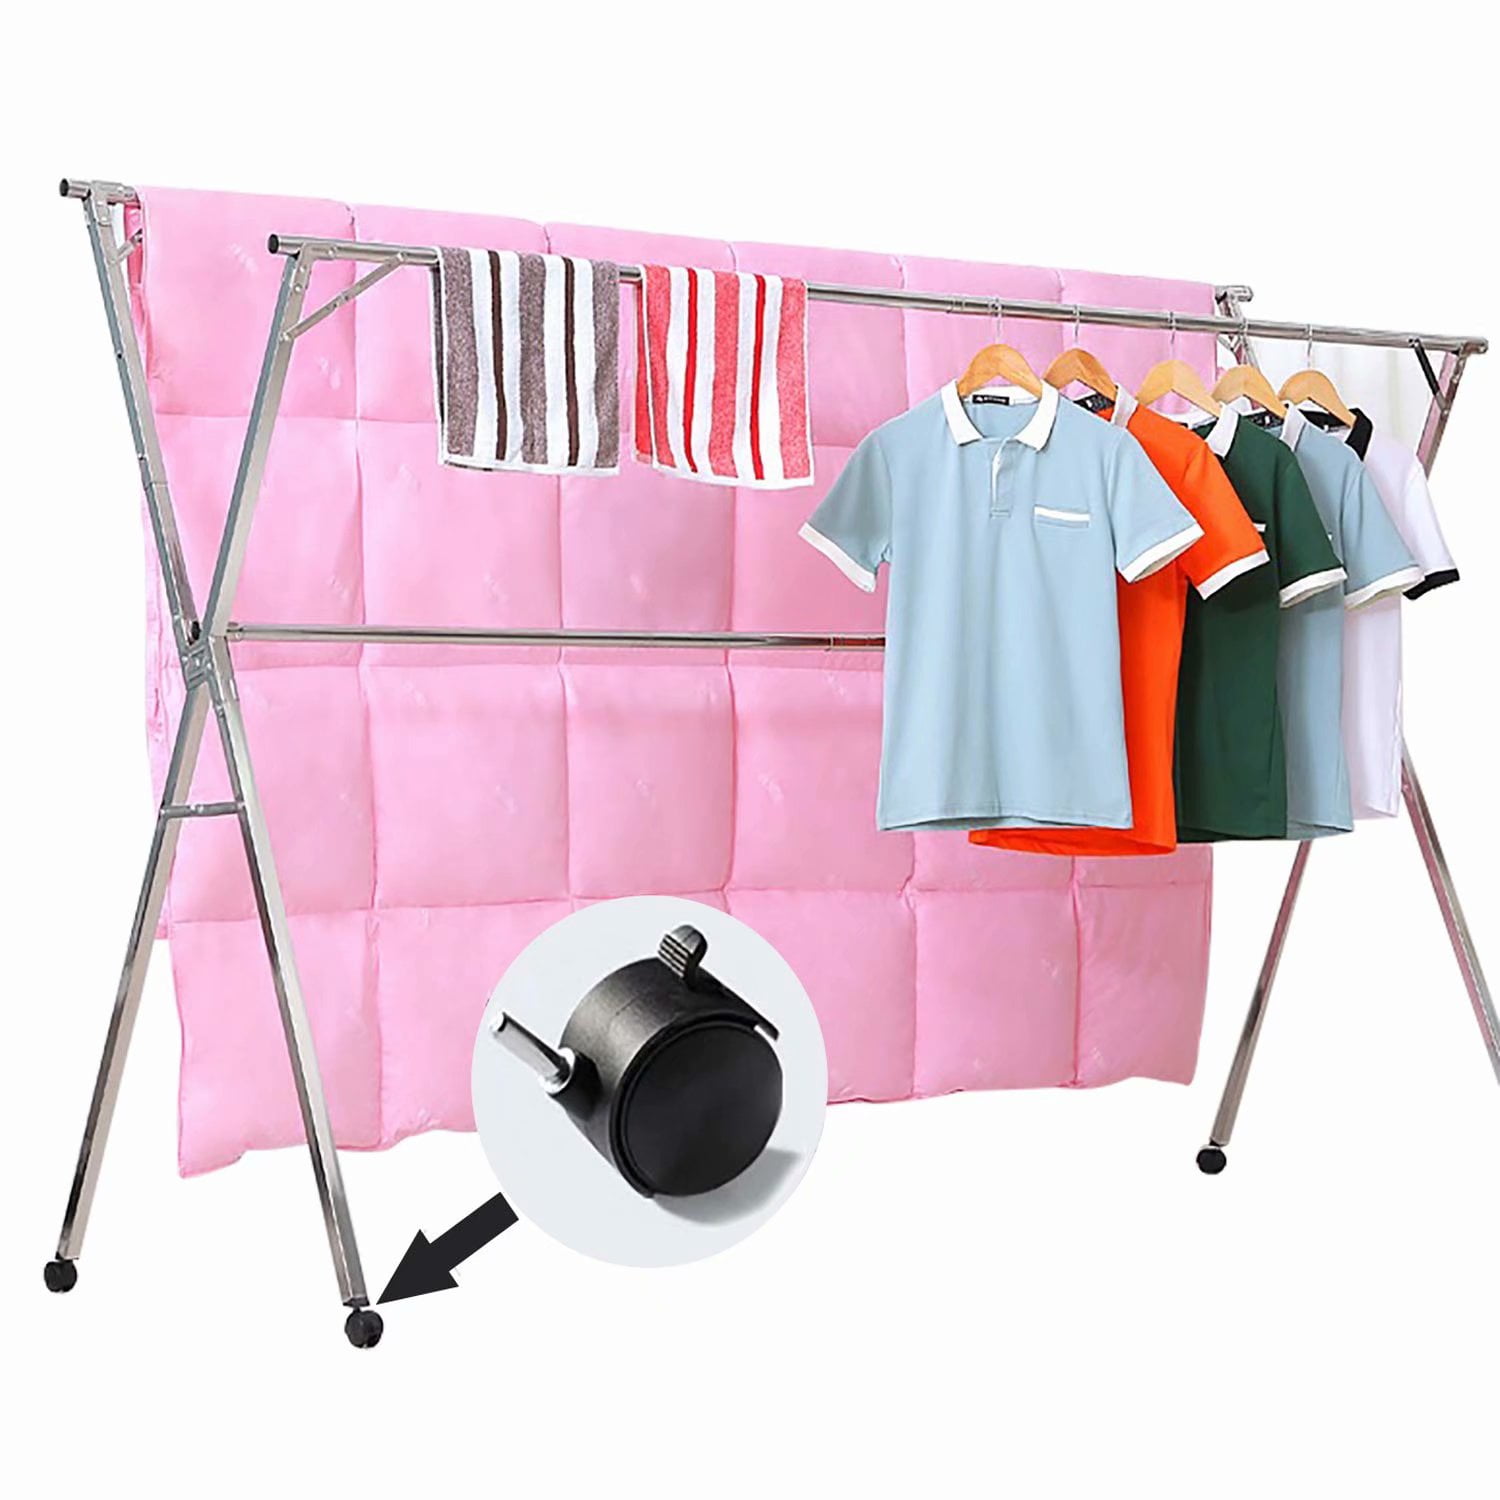 Free Installed Stainless Steel Clothes Drying Rack Foldable Space Stainless Steel Laundry Drying Rack